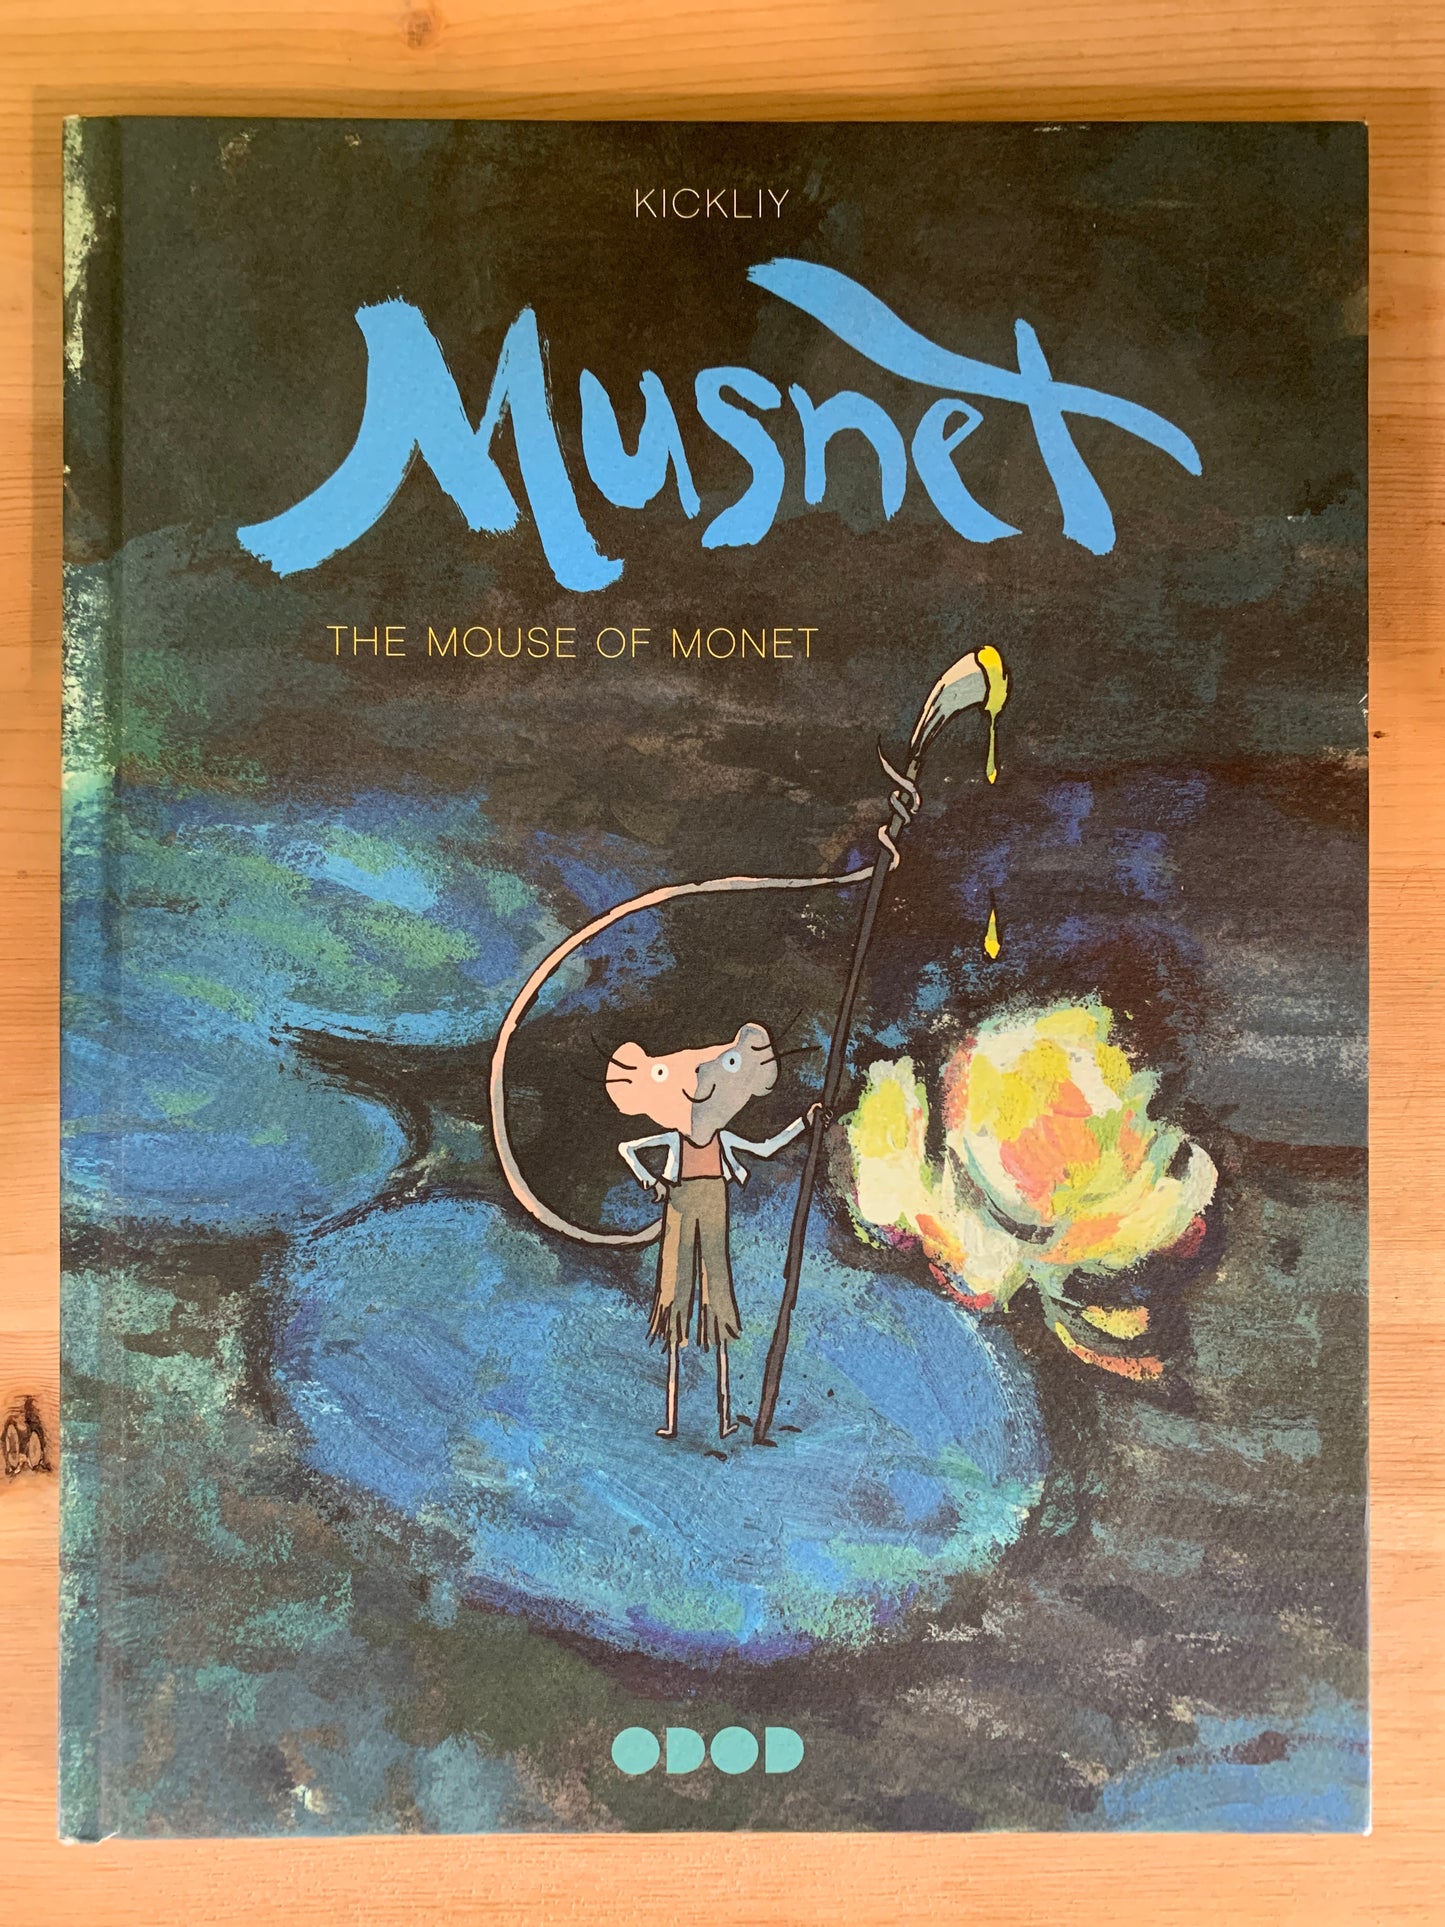 Musnet: The Mouse of Monet